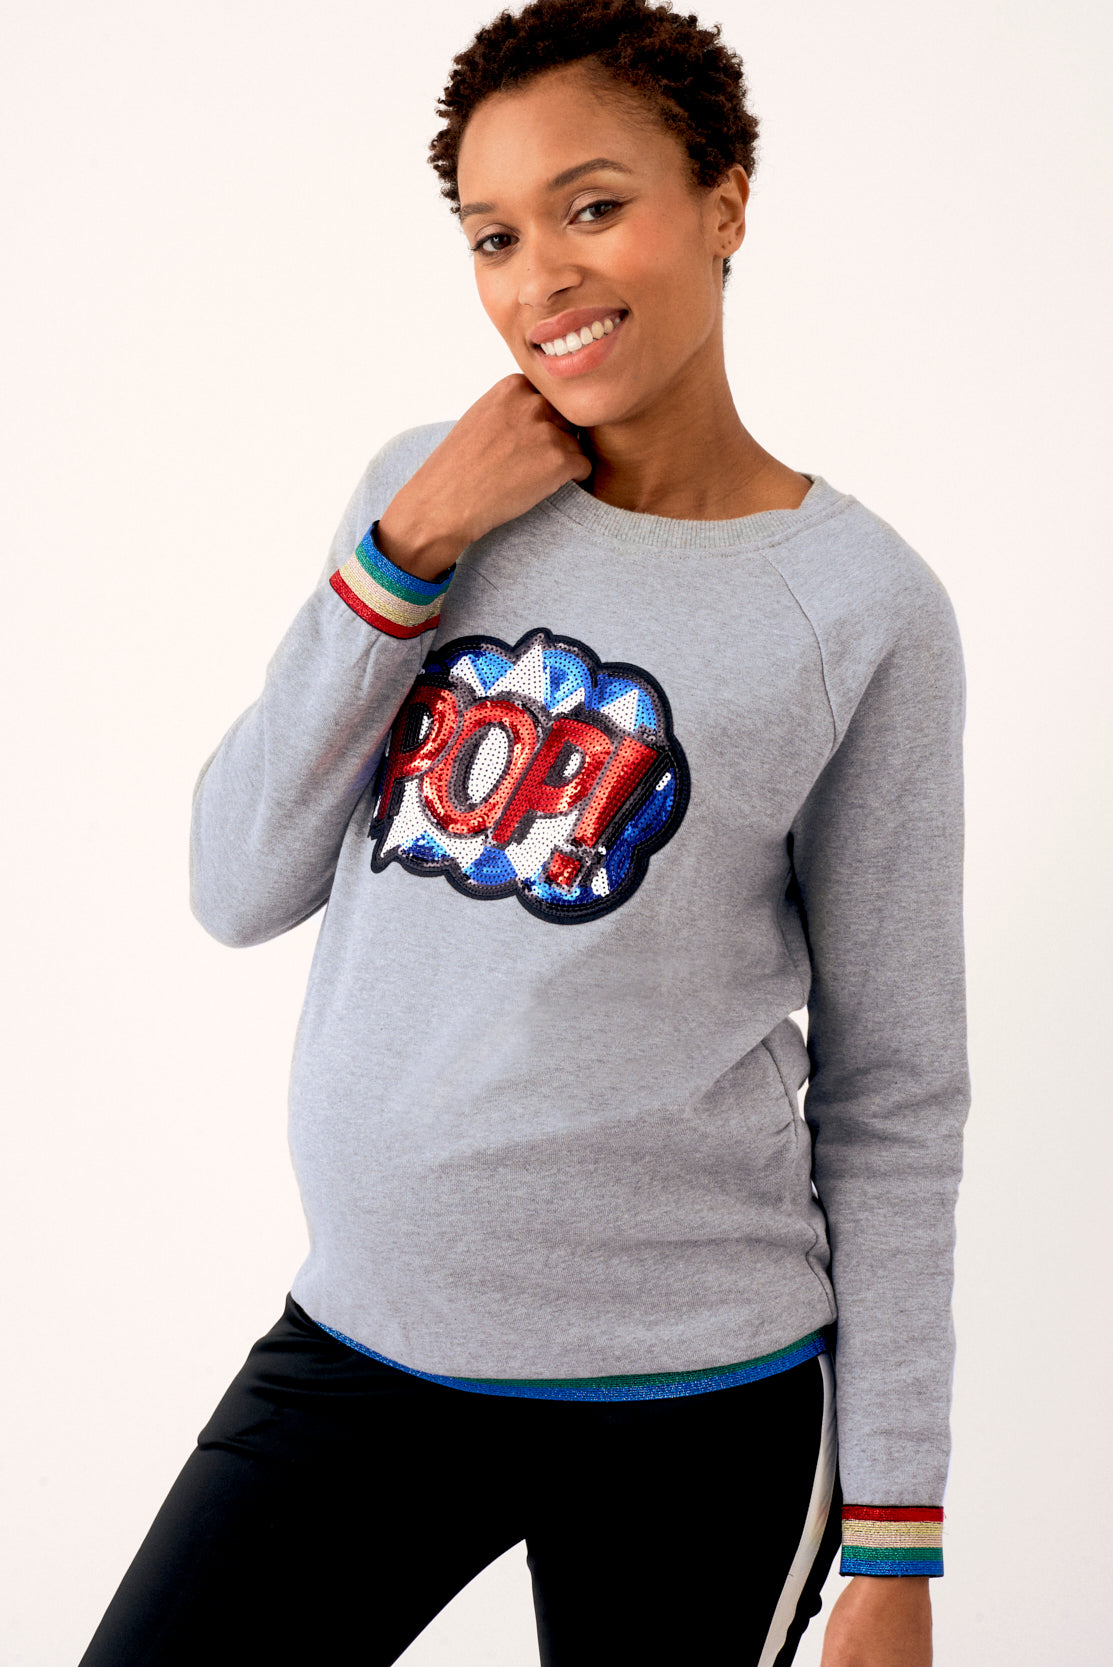 Make a statement in the sequin applique POP maternity sweatshirt! Add a little glitz to your pregnancy fashion wardrobe with a dressed-up playful vibe in this relaxed-fit maternity sweatshirt in cosy organic cotton. Subtle ruching mean it's also perfect as an oversized sweatshirt for your post-pregnancy wardrobe.